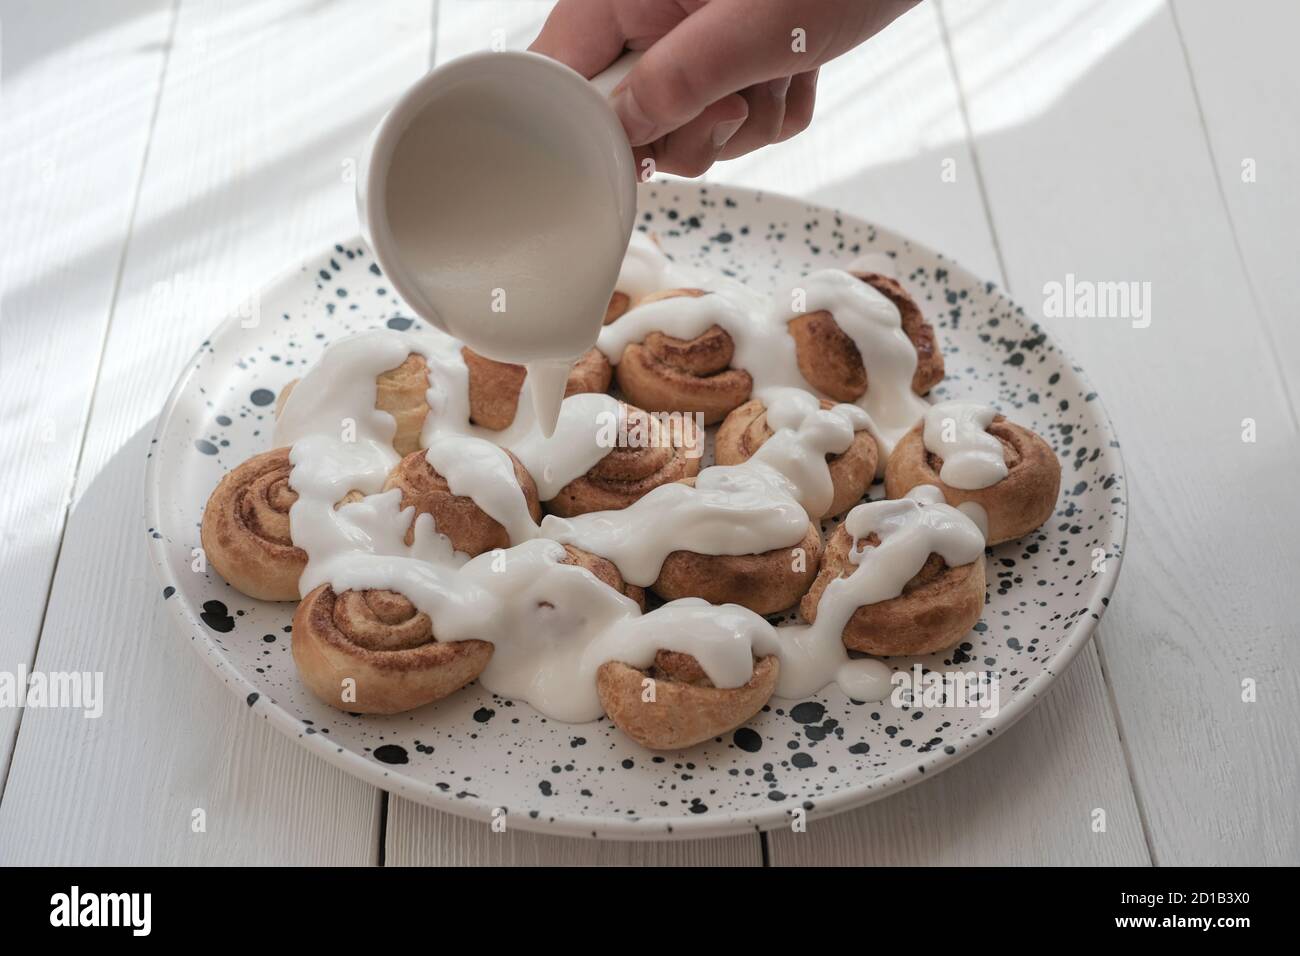 human hand pouring milk sauce or frosting on cinnamon swirls. selective focus. homemade cinnamon rolls with cream glaze. home cooking concept. Stock Photo